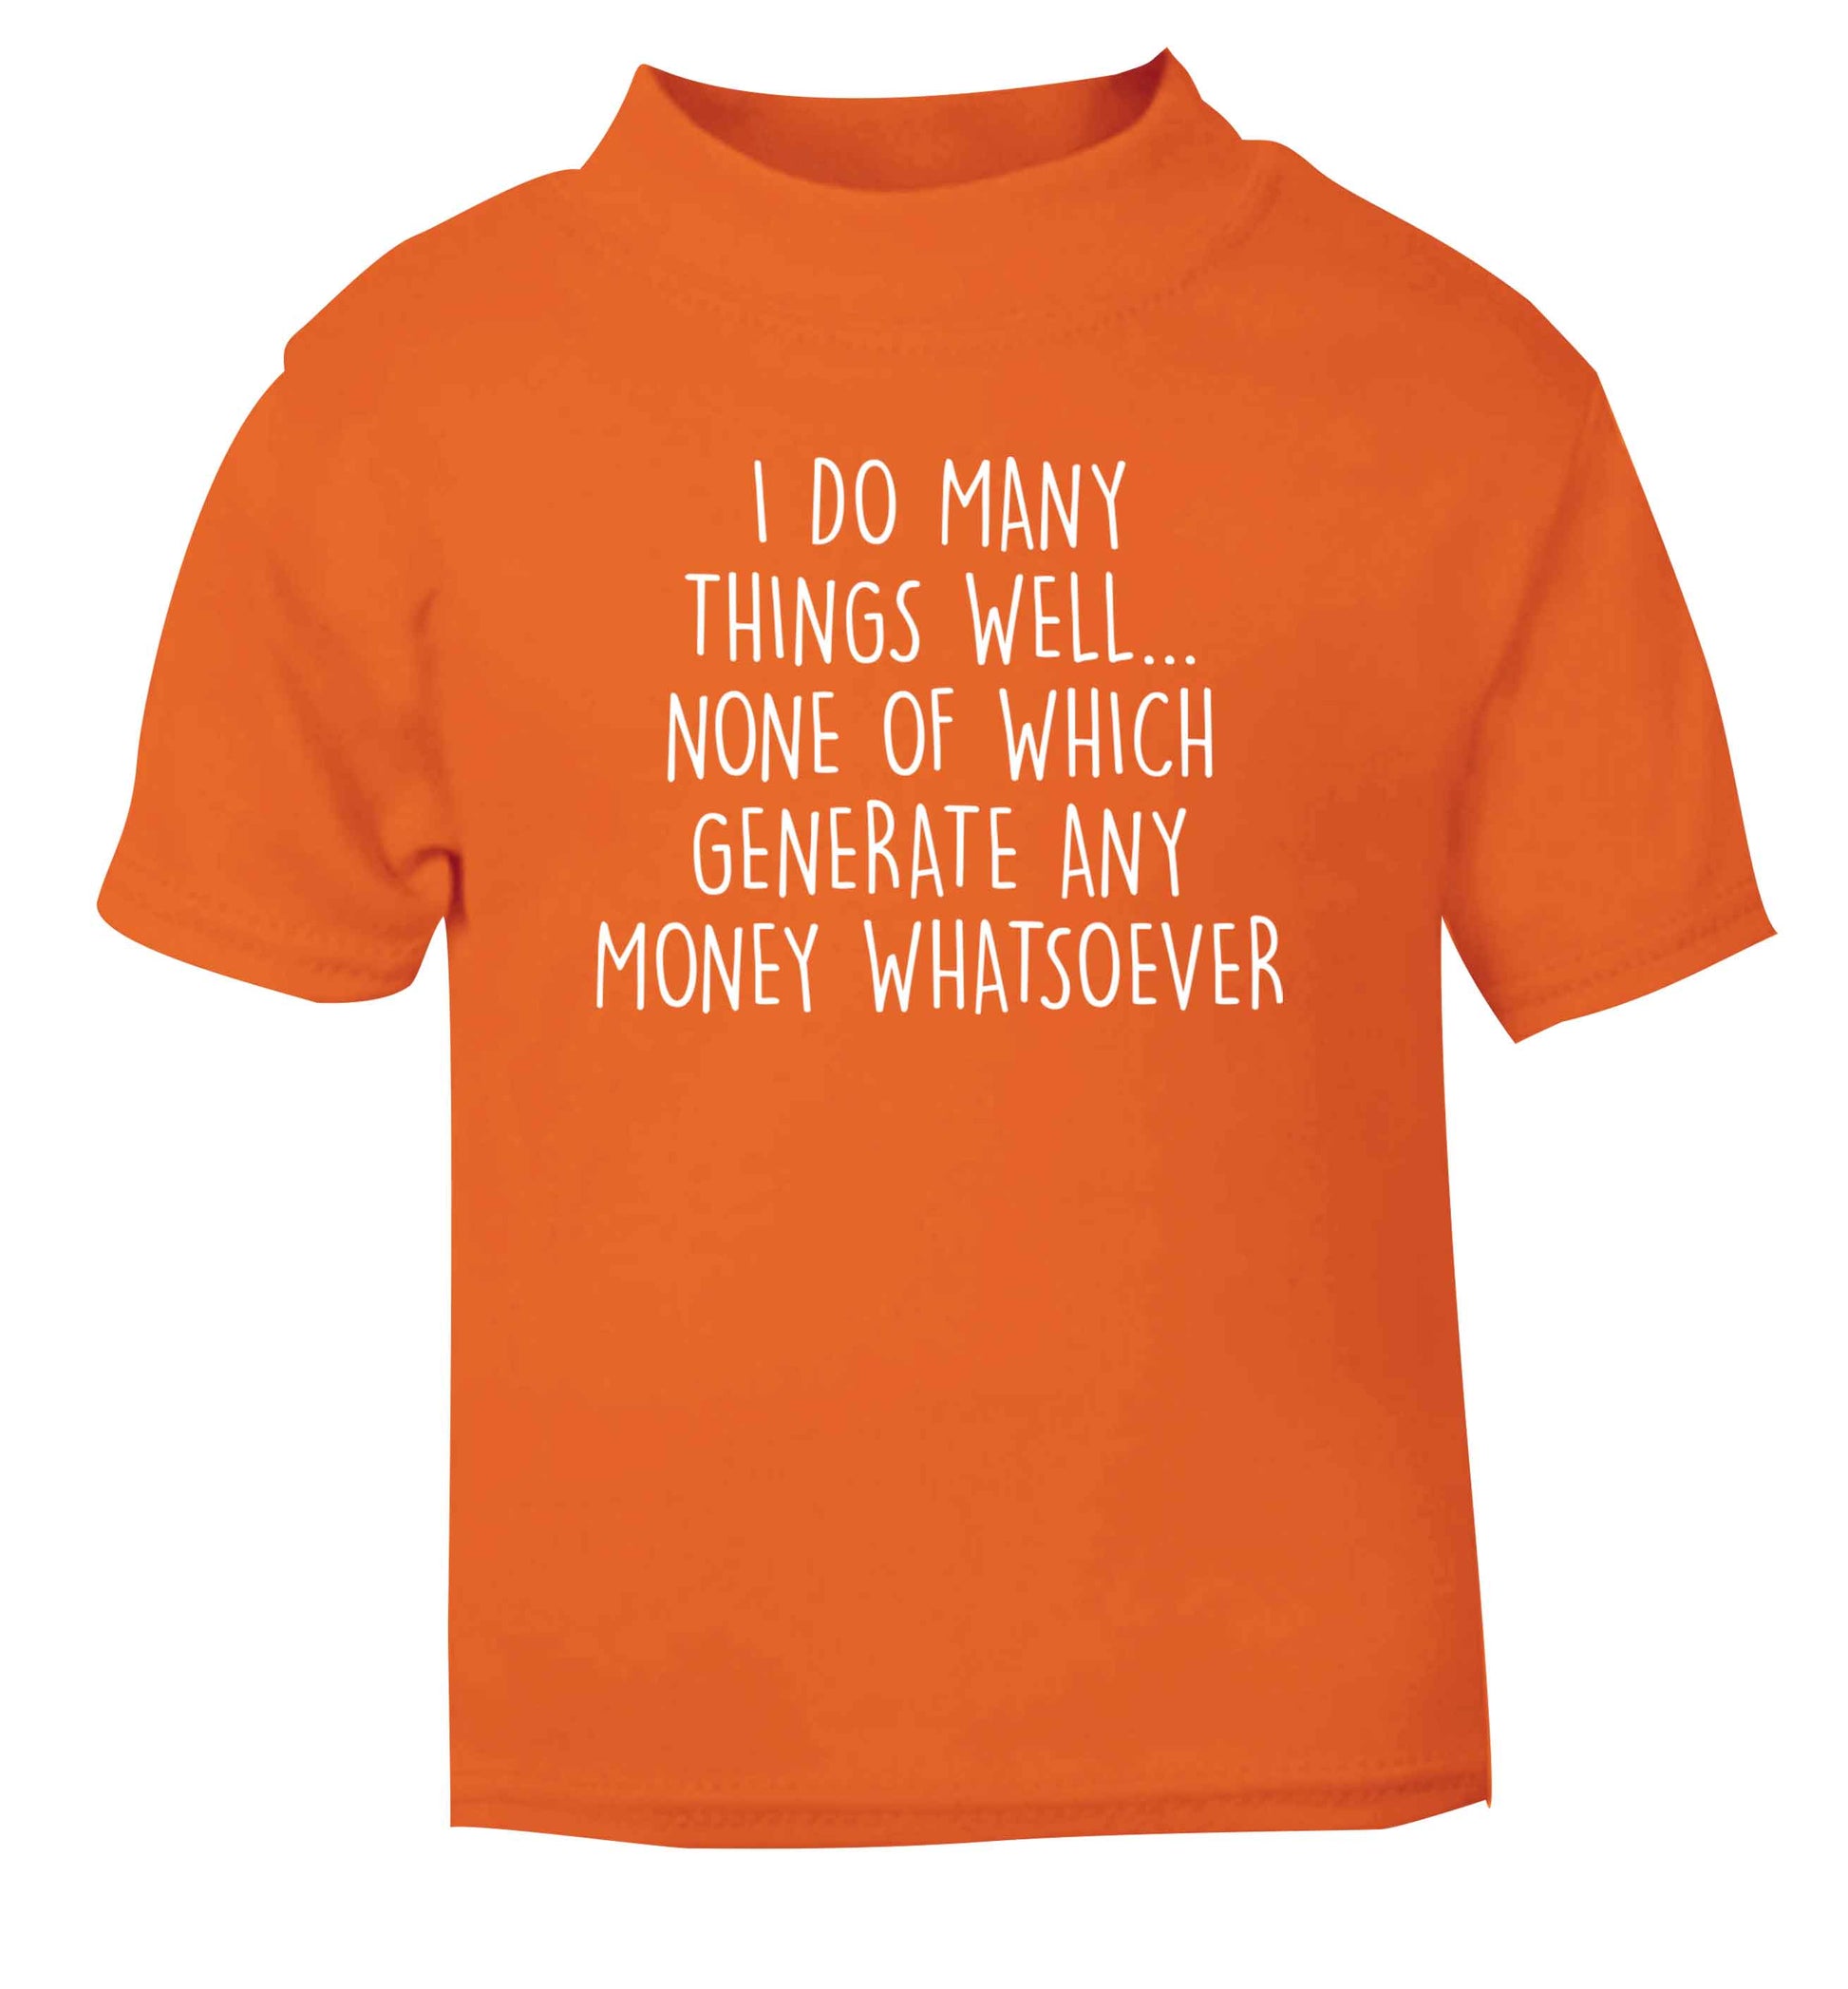 I do many things well none of which generate income orange Baby Toddler Tshirt 2 Years